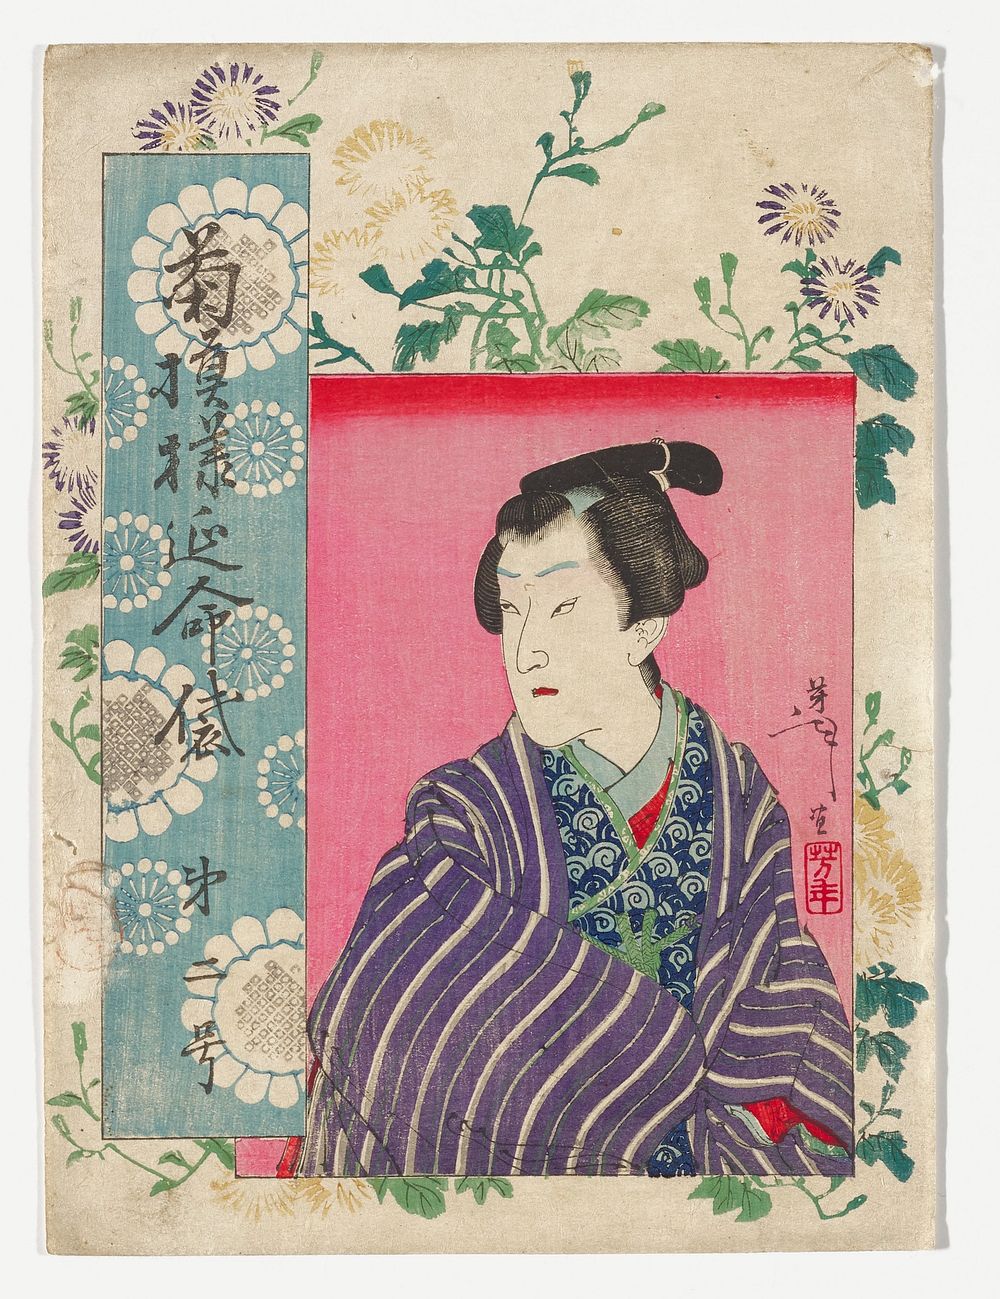 Portrait of a frowning man in rectangle in LRC, with red lips, wearing purple, grey and white striped kimono and…